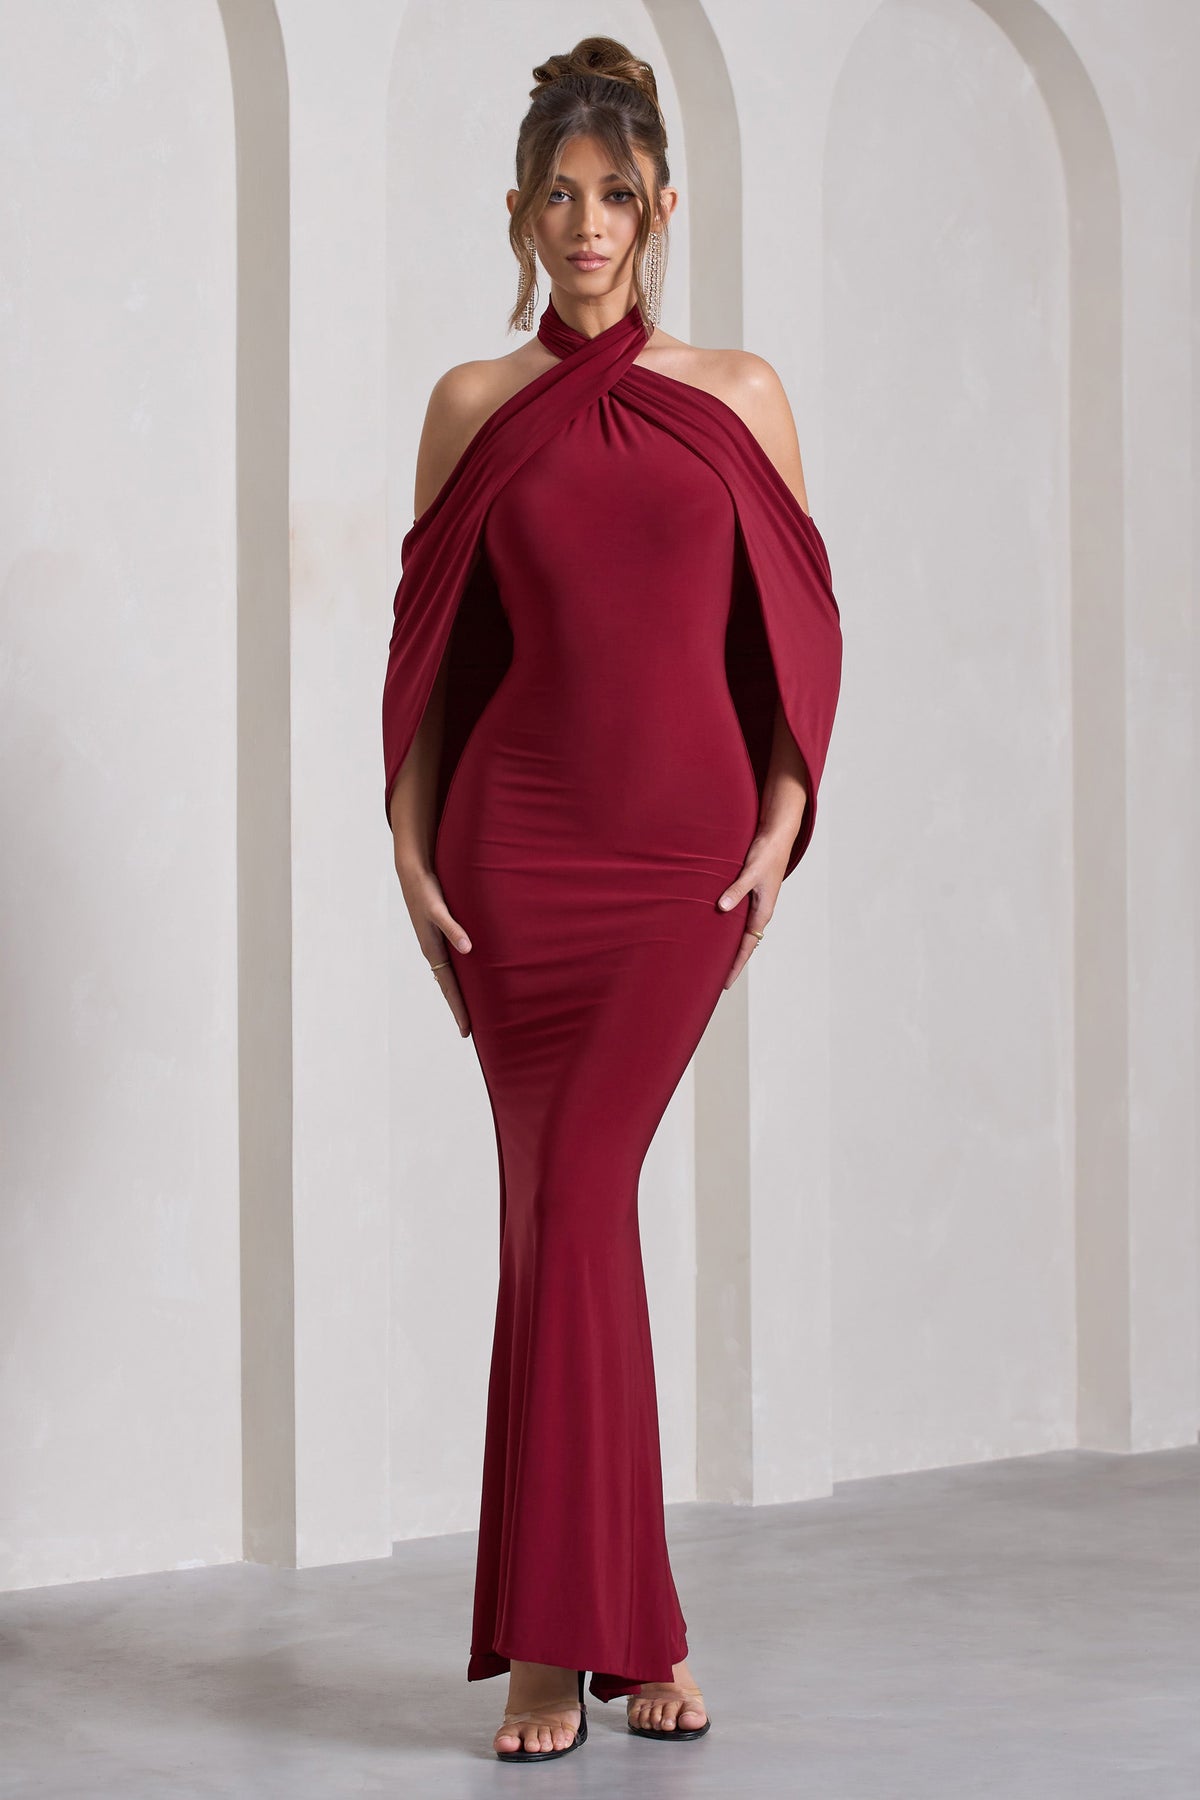 With London Fishtail Crossed Dress – L Halter-Neck Cape Berry USA Club Revelation - Red Maxi